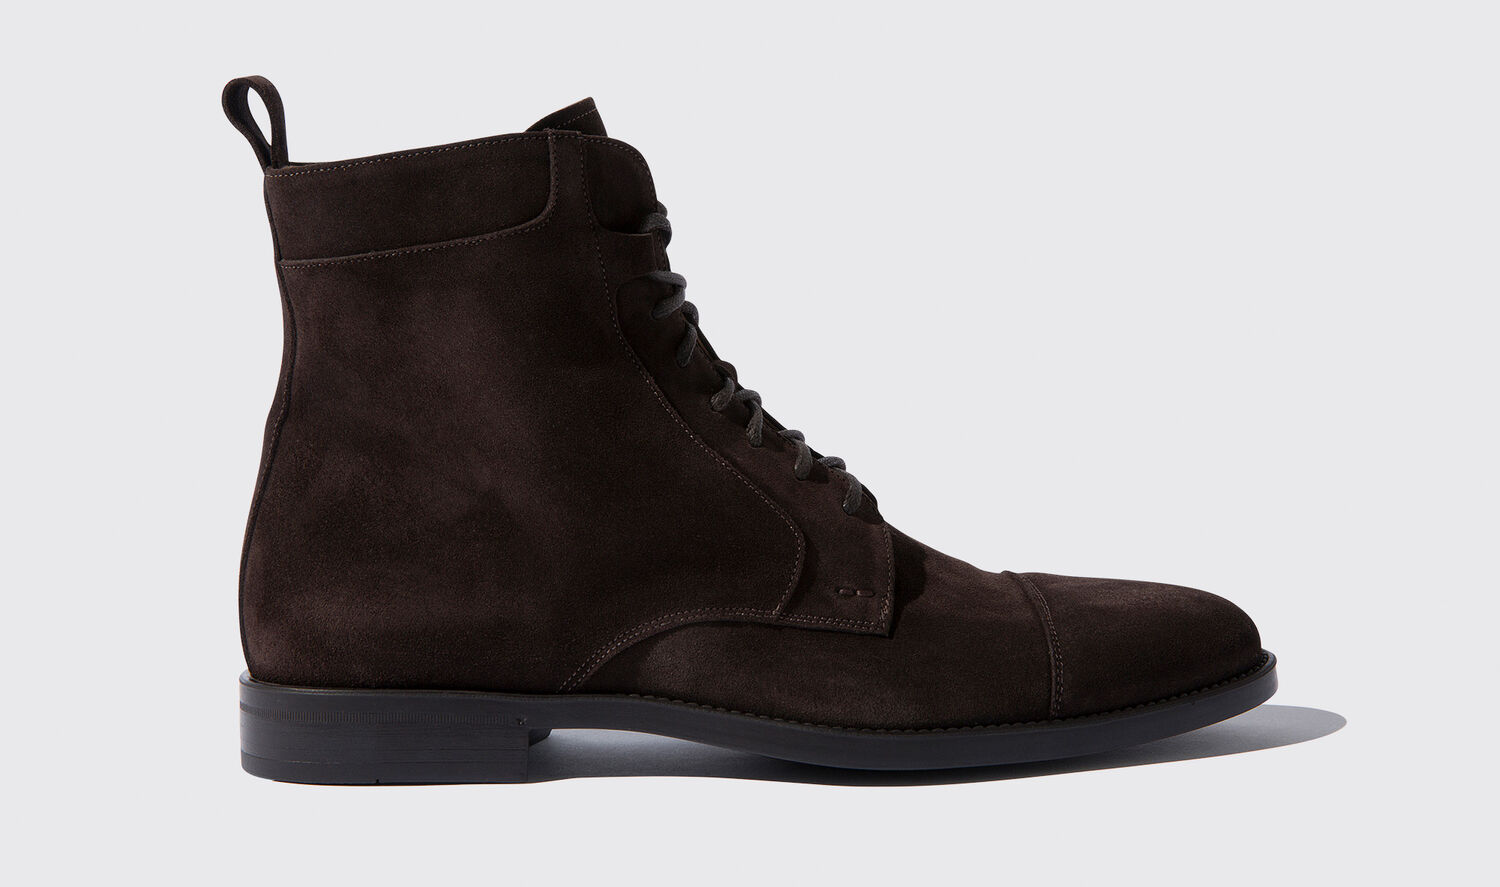 Scarosso Ankle Boots Dante Moro Scamosciato Suede Leather In Dark Brown Suede